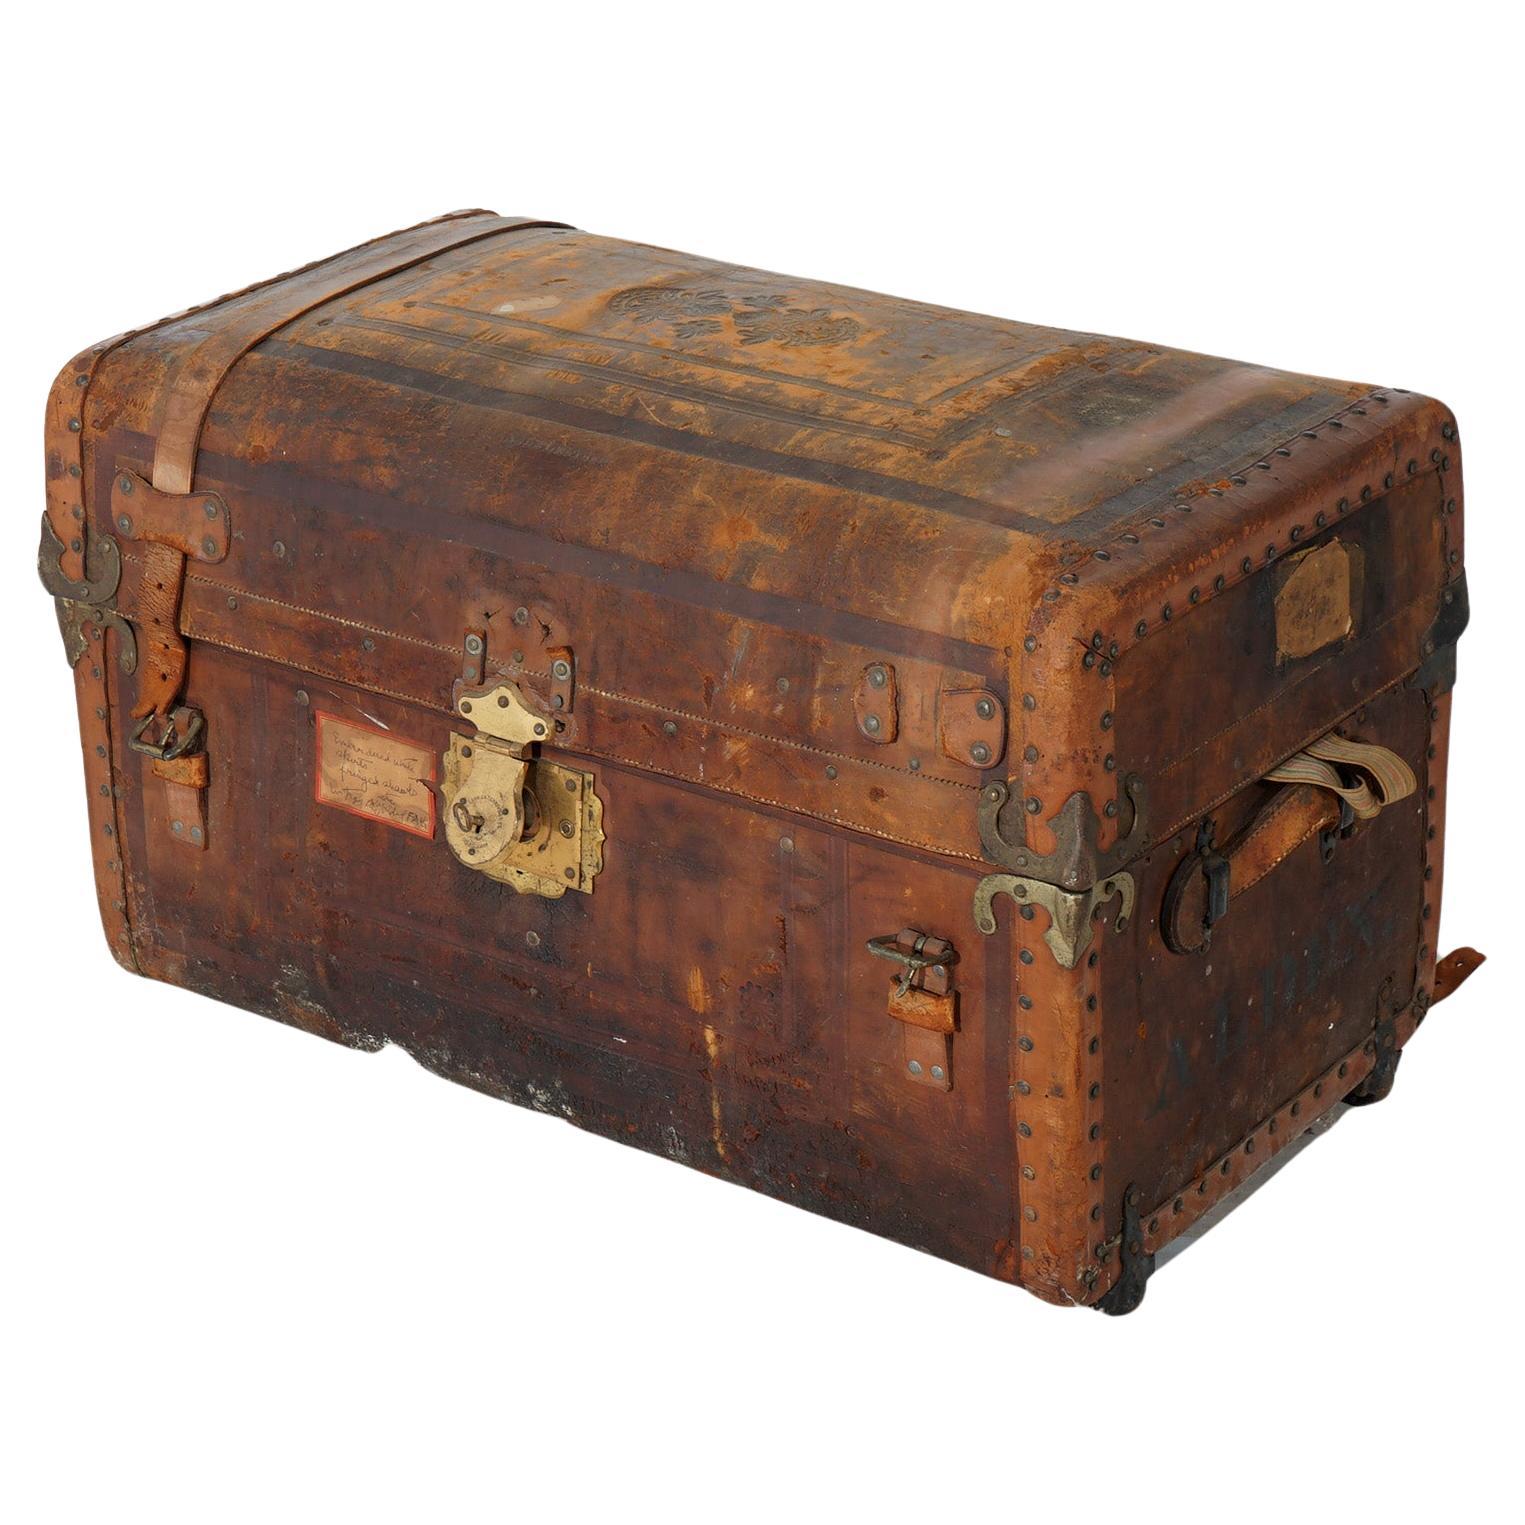 What is an old steamer trunk?